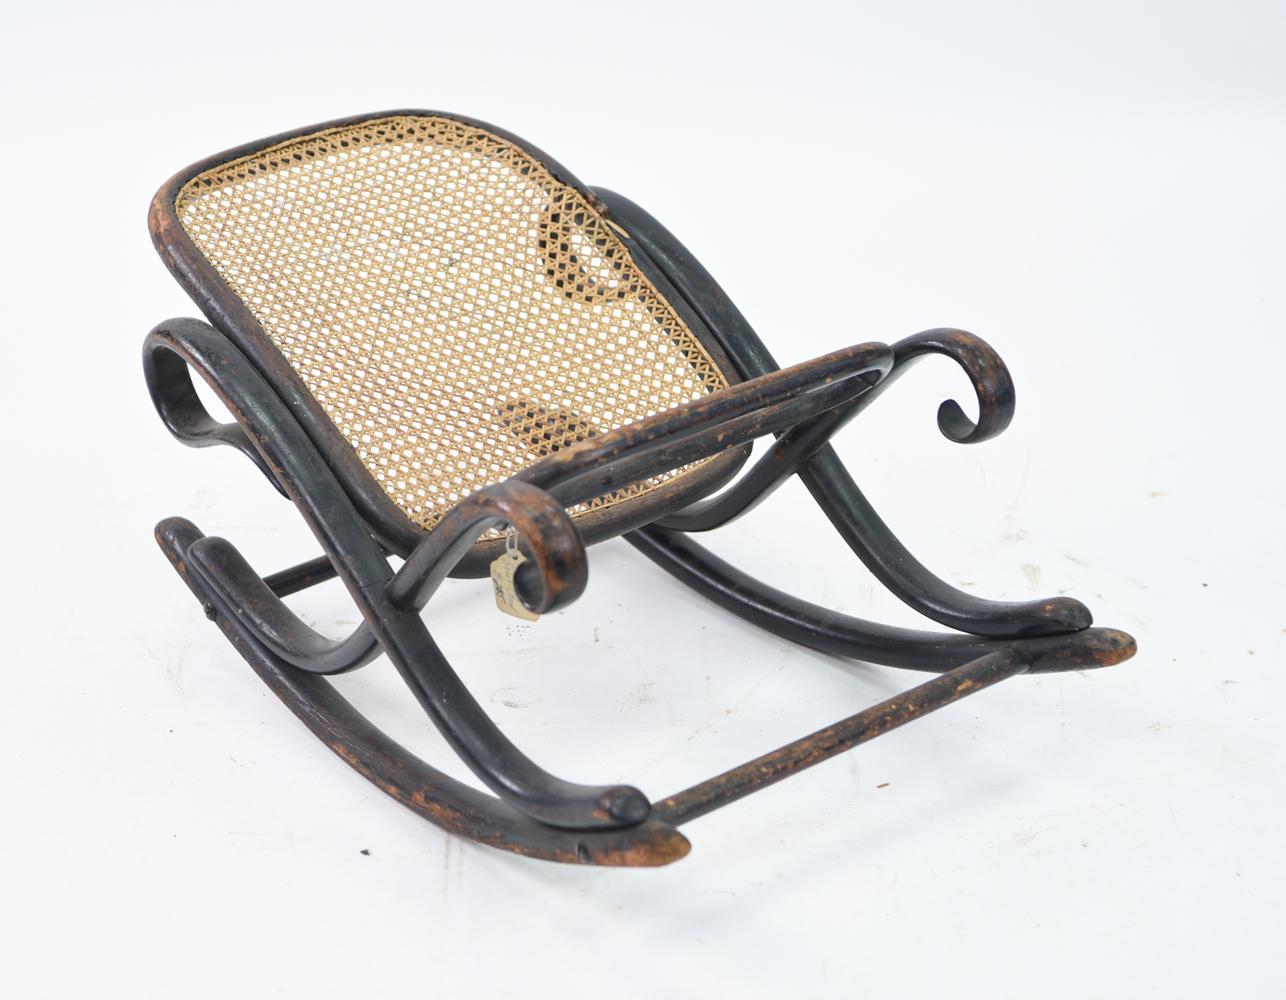 19th century cabinet maker Michael Thonet is credited with the invention of bentwood furniture. His iconic rocking chairs defined an era of style and continue to be sold and reproduced today. This footstool is attributed to Thonet's furniture